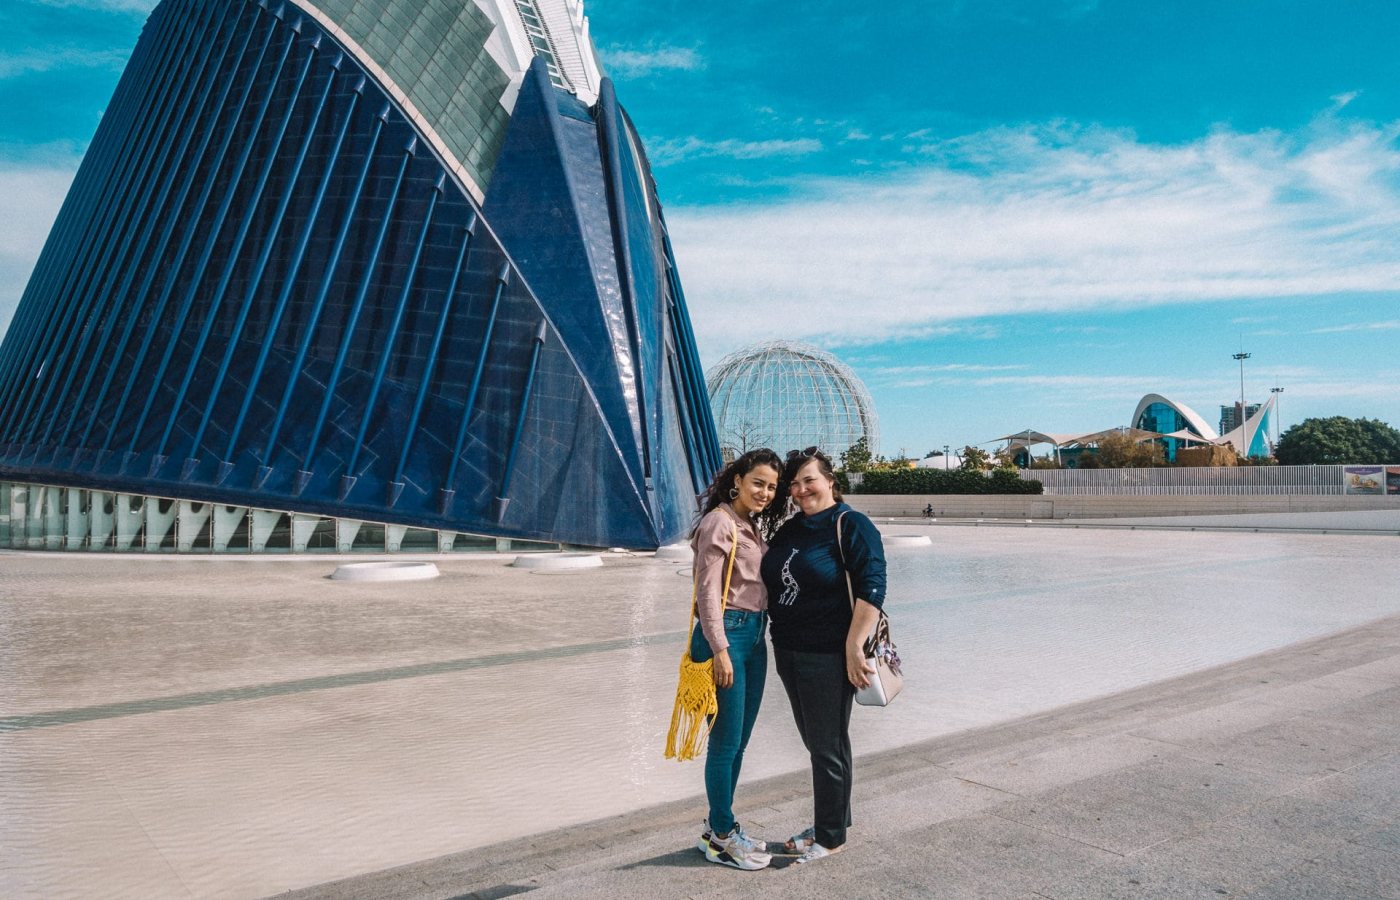 My wife and mom in Valencia, Spain